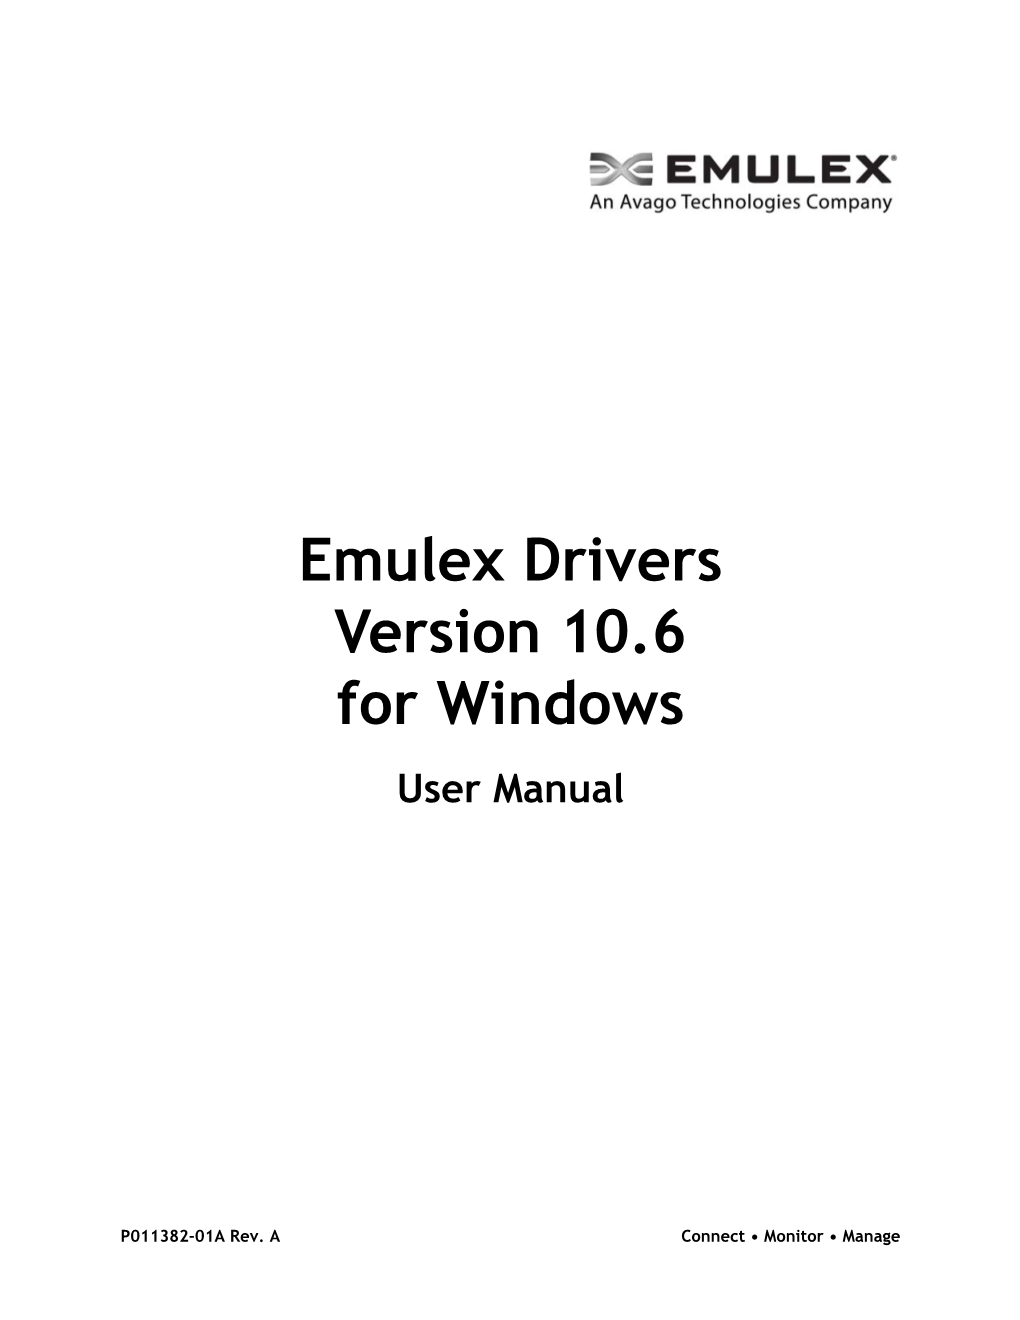 Emulex Drivers Version 10.6 for Windows User Manual